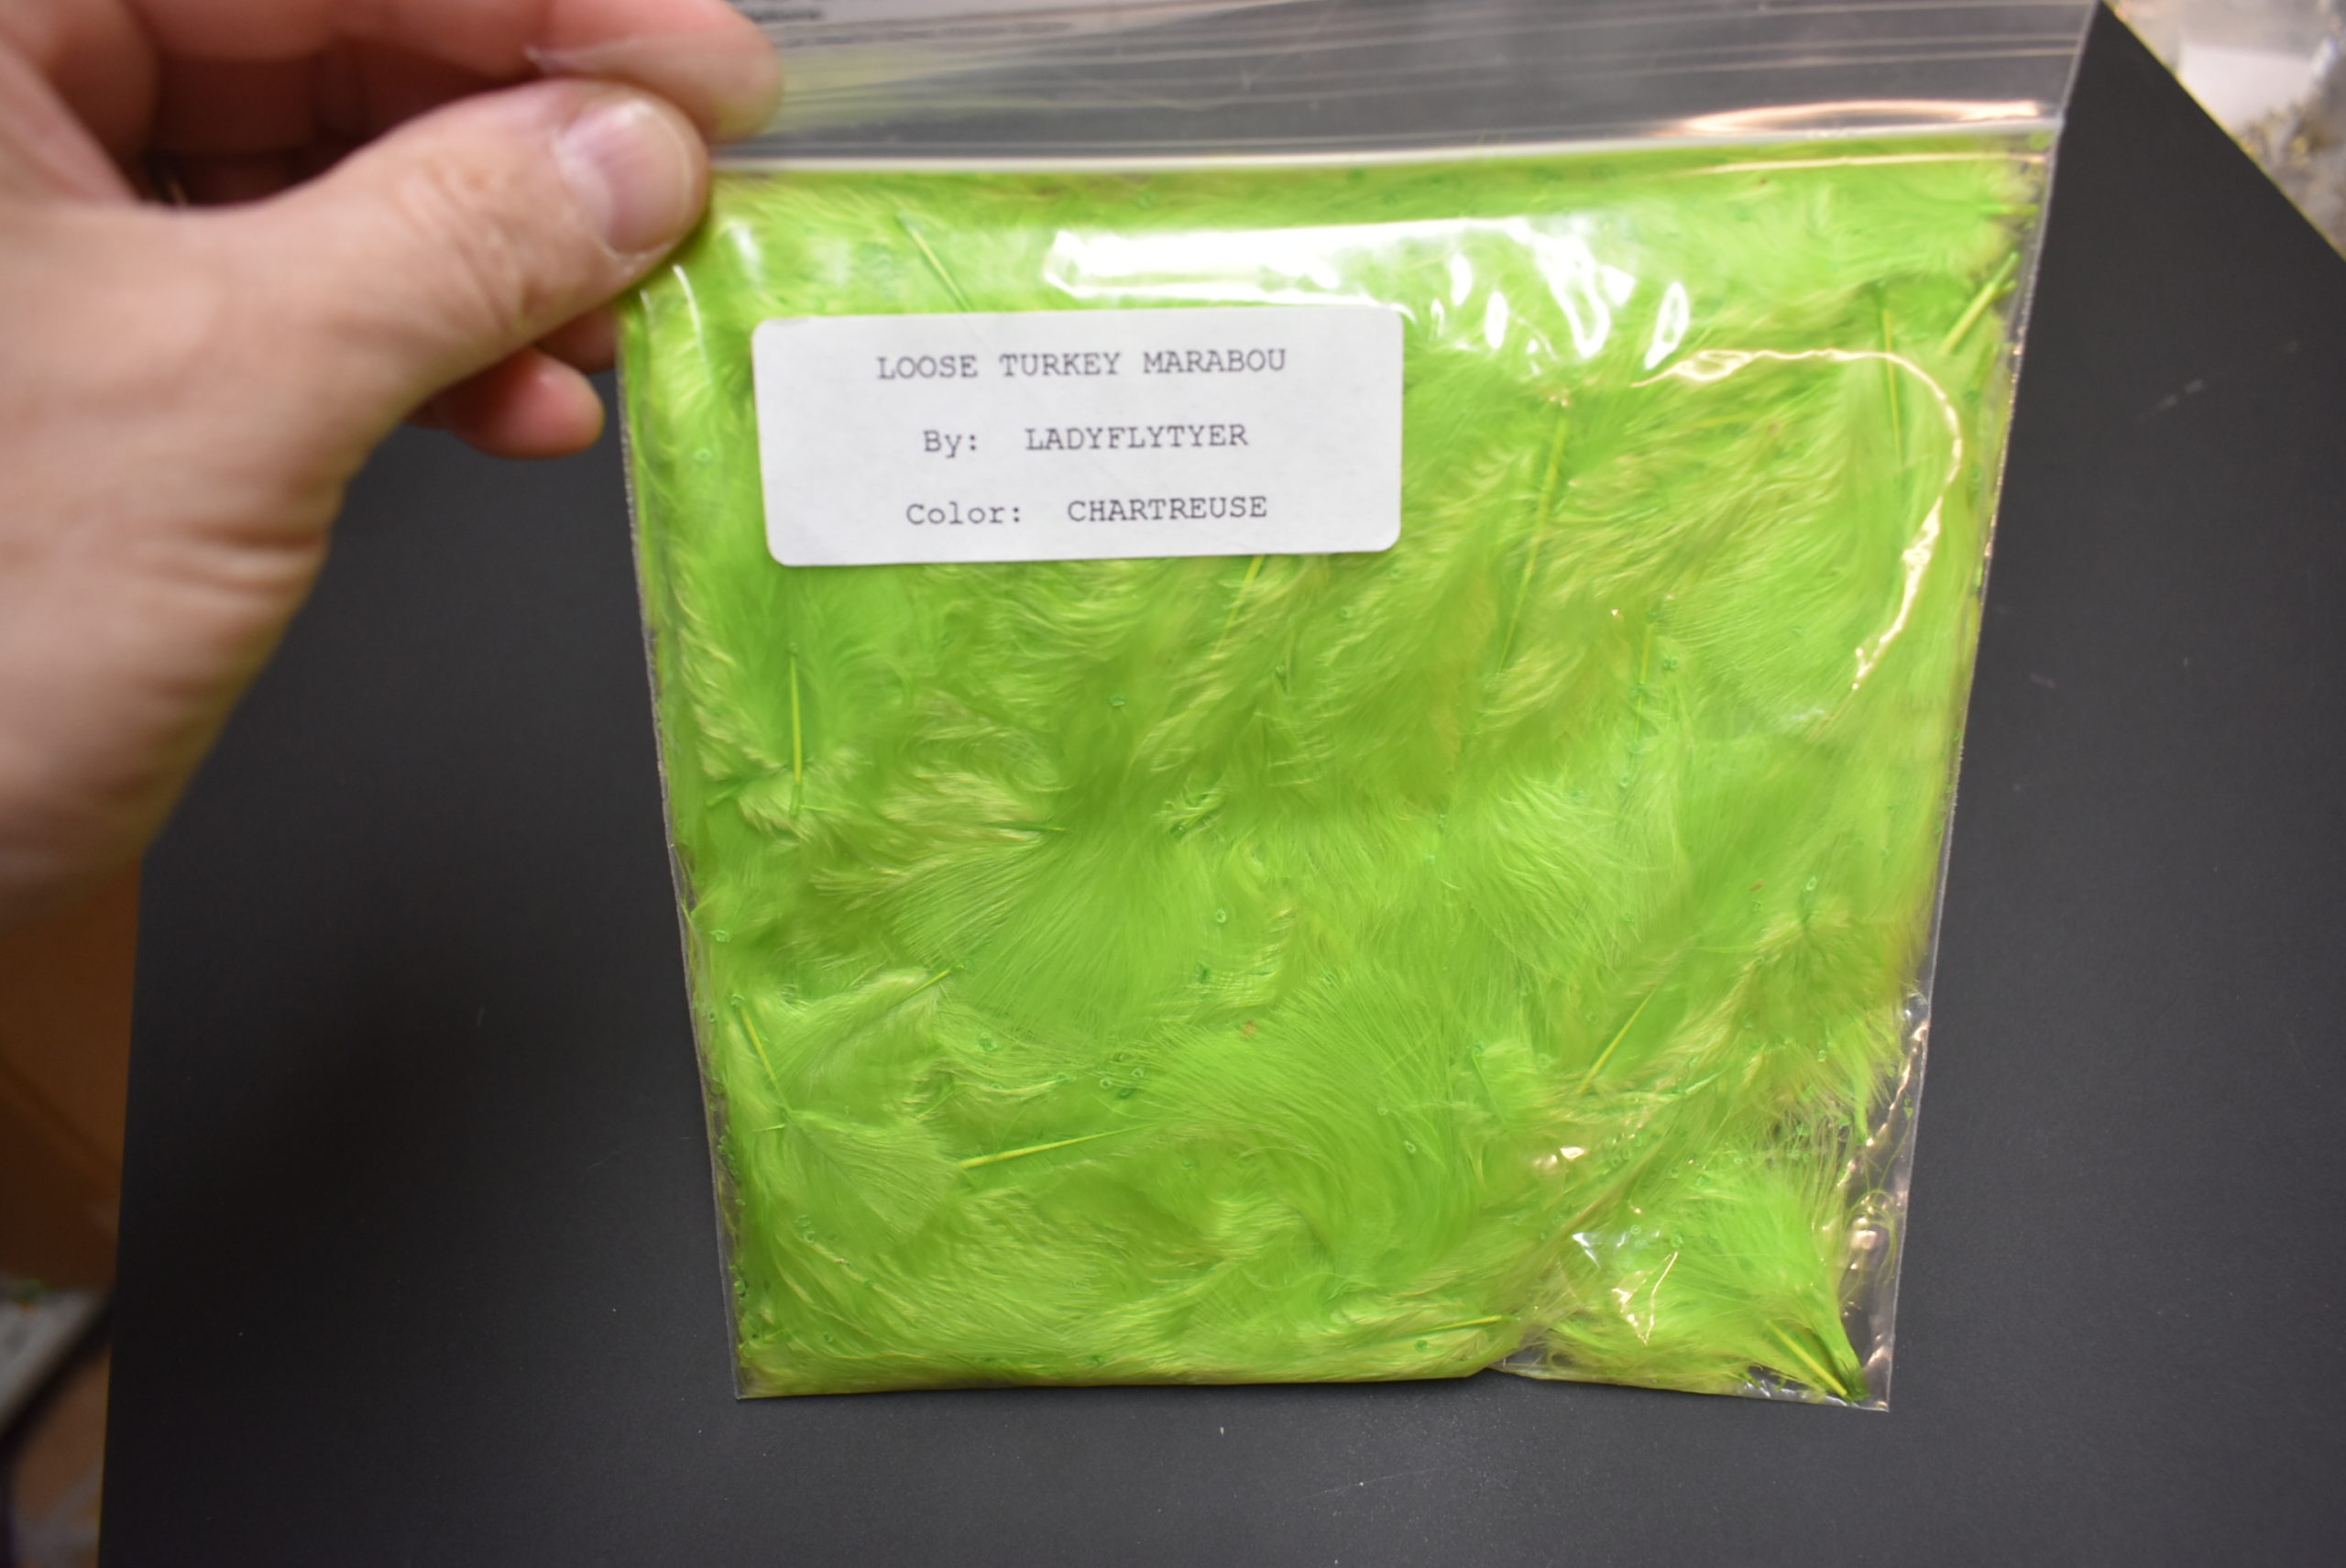 Bag Loose FLUORESCENT CHARTREUSE Turkey Marabou Feathers for Fly Tying 1/4 oz 